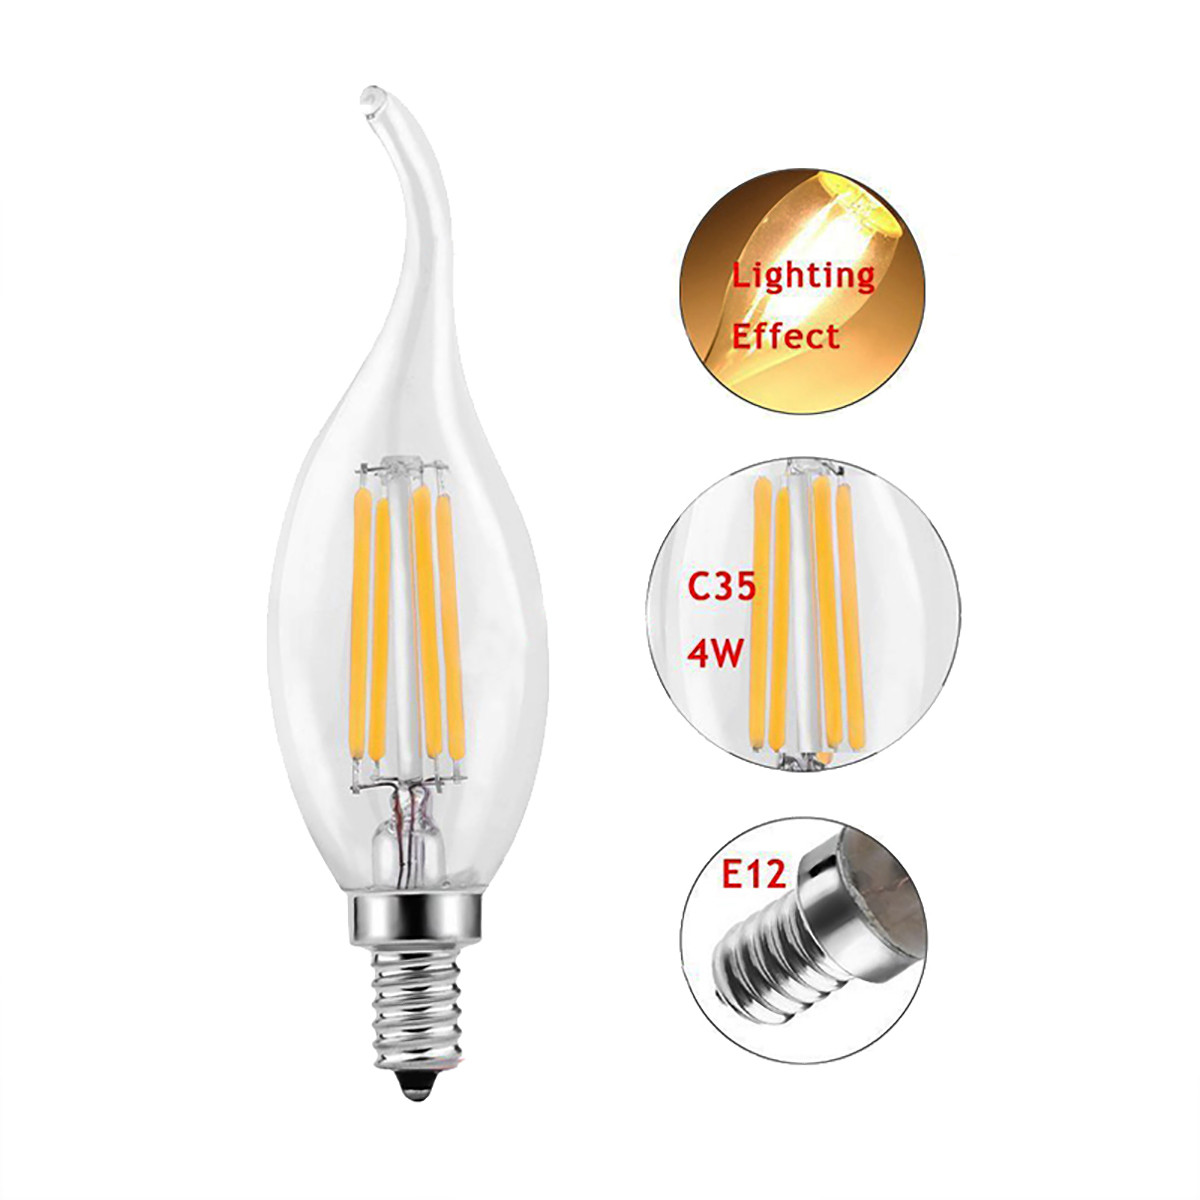 Includes SOL Notebook 6pk LED Candles Bulb E27 5W ES Large Screw Edison Energy Saver Bulb White Chandelier Lamp LED Candles Beacon E27 Candle Light Bulb